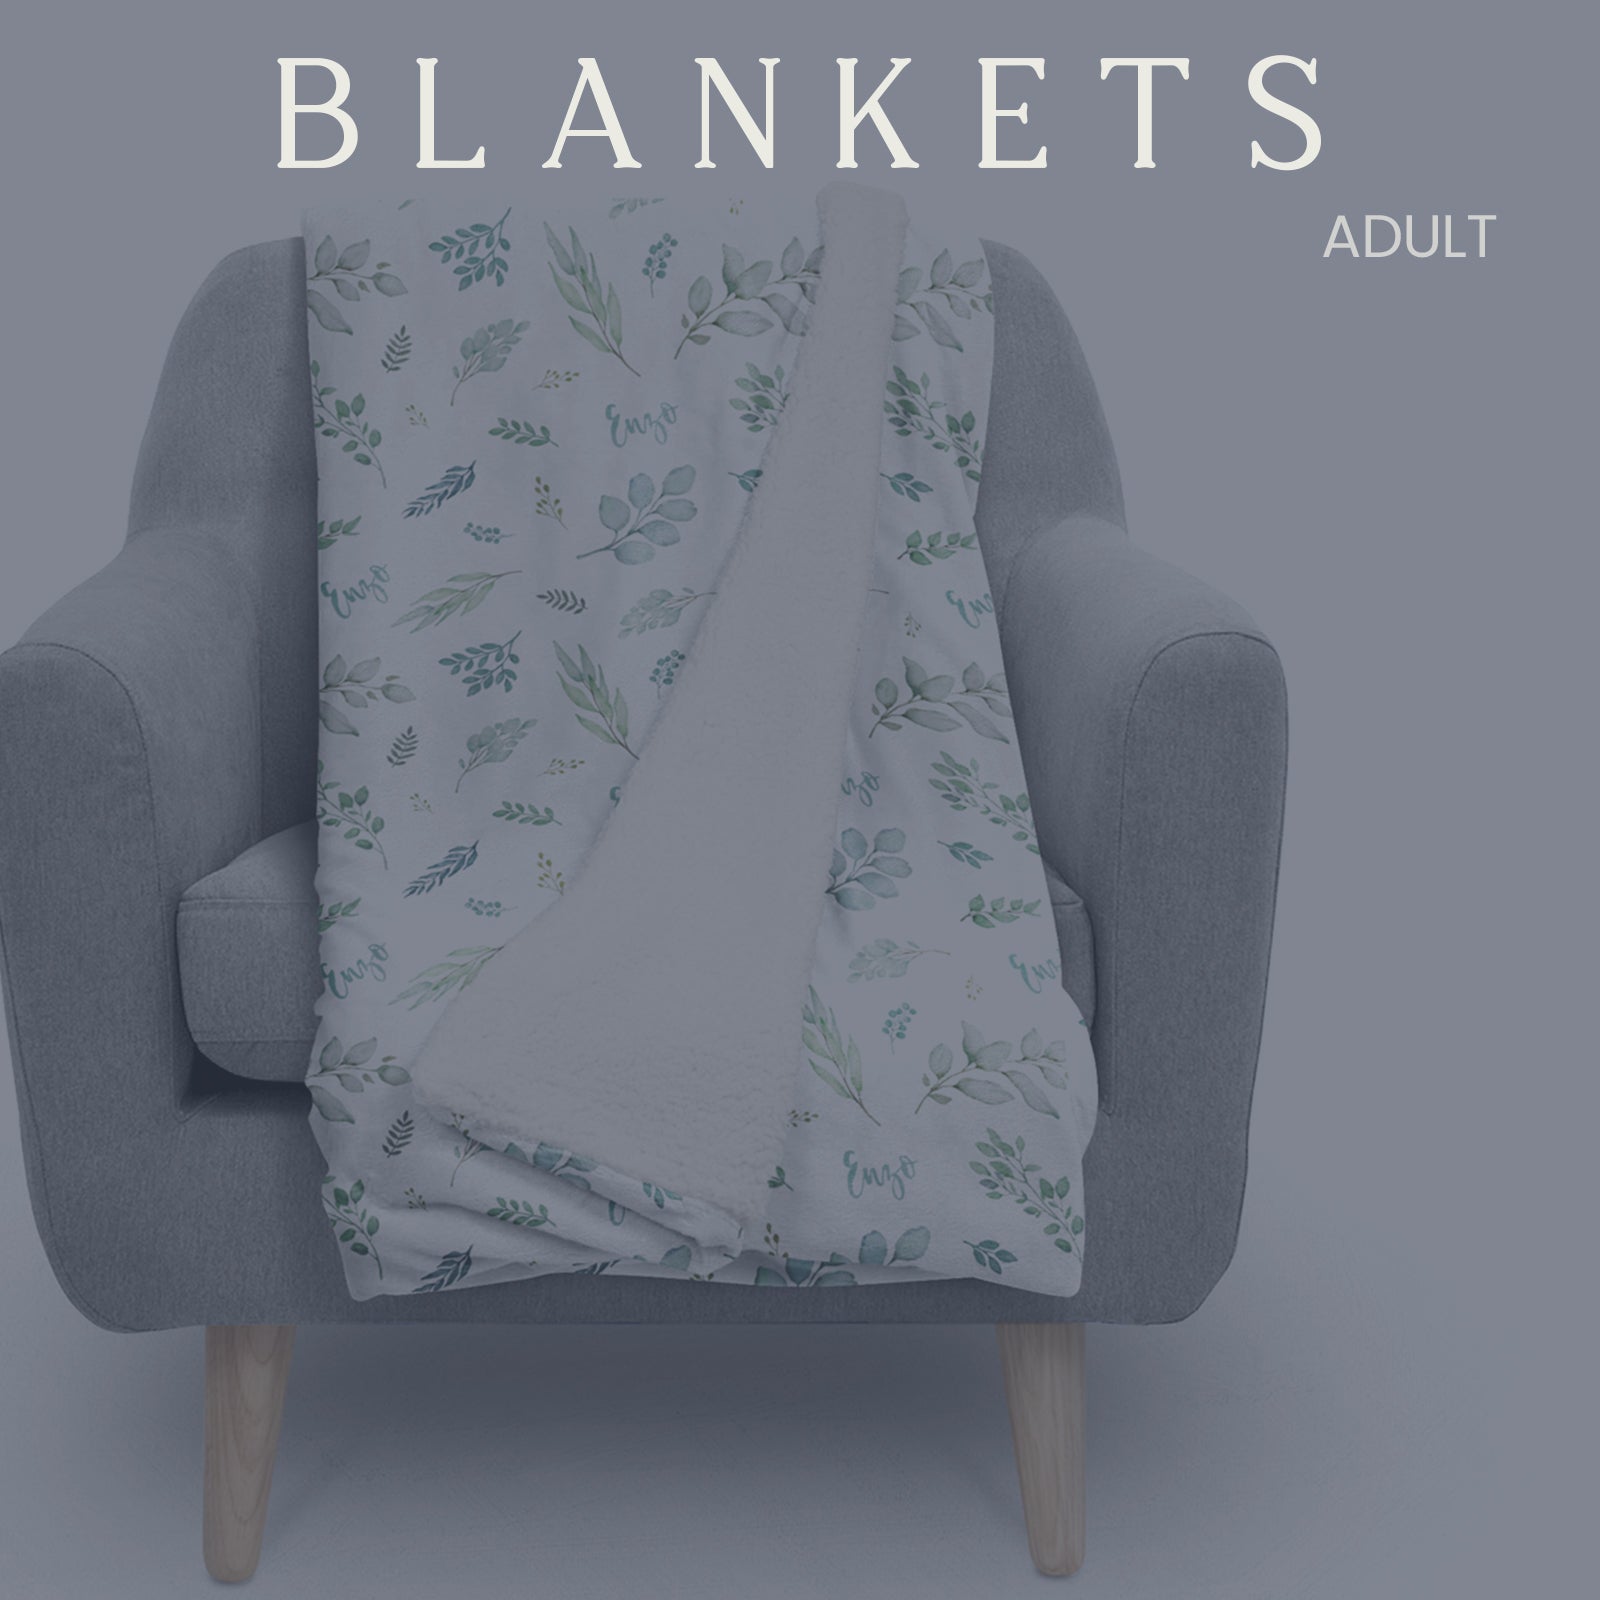 Adults - Blankets